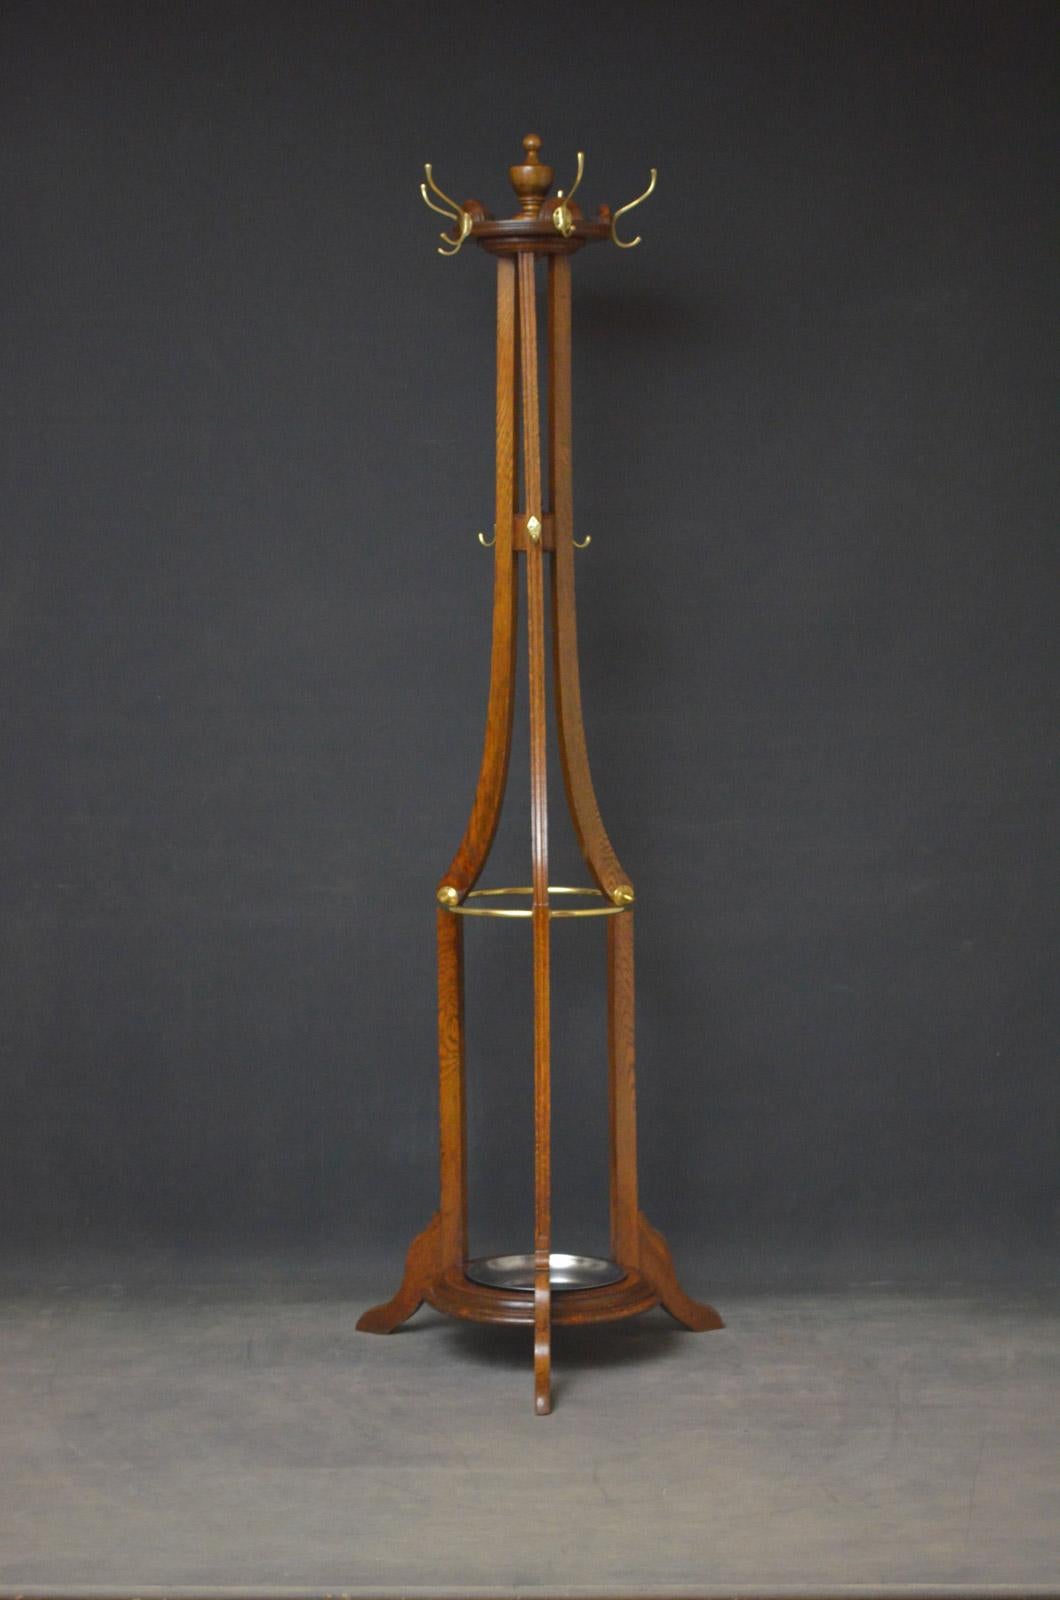 Sn4592 Arts & Crafts oak hall Stand, having original brass hat and coat hangers on revolving platform and 3 reeded supports terminating in 3 legs united by circular base with removable drip tray (replacement). This antique coat Stand retains its